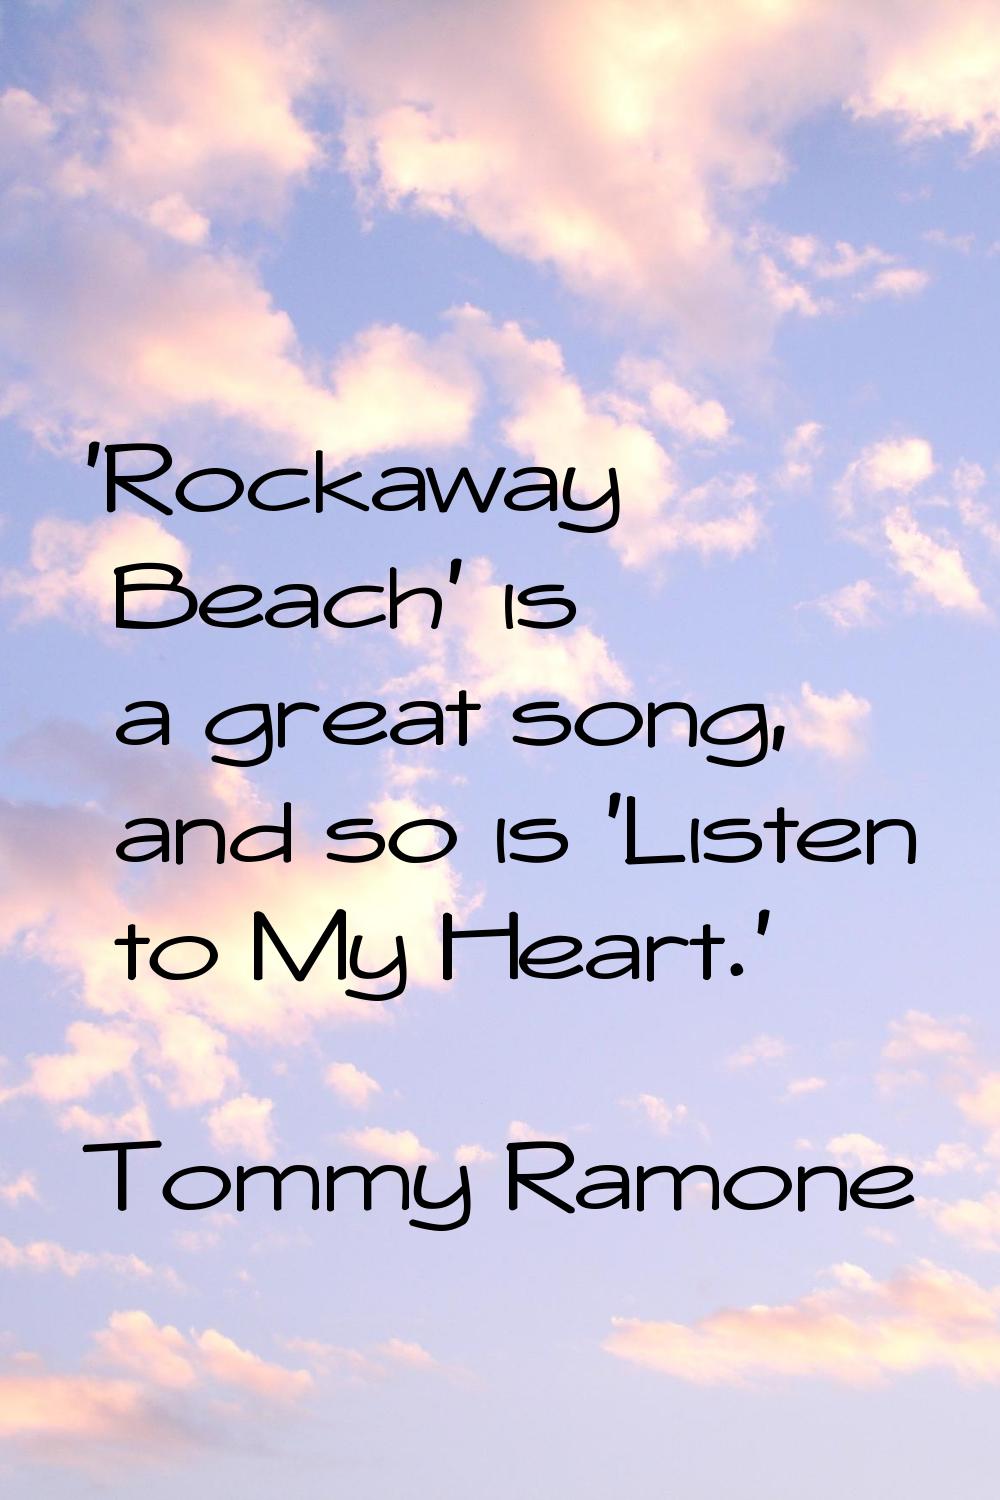 'Rockaway Beach' is a great song, and so is 'Listen to My Heart.'